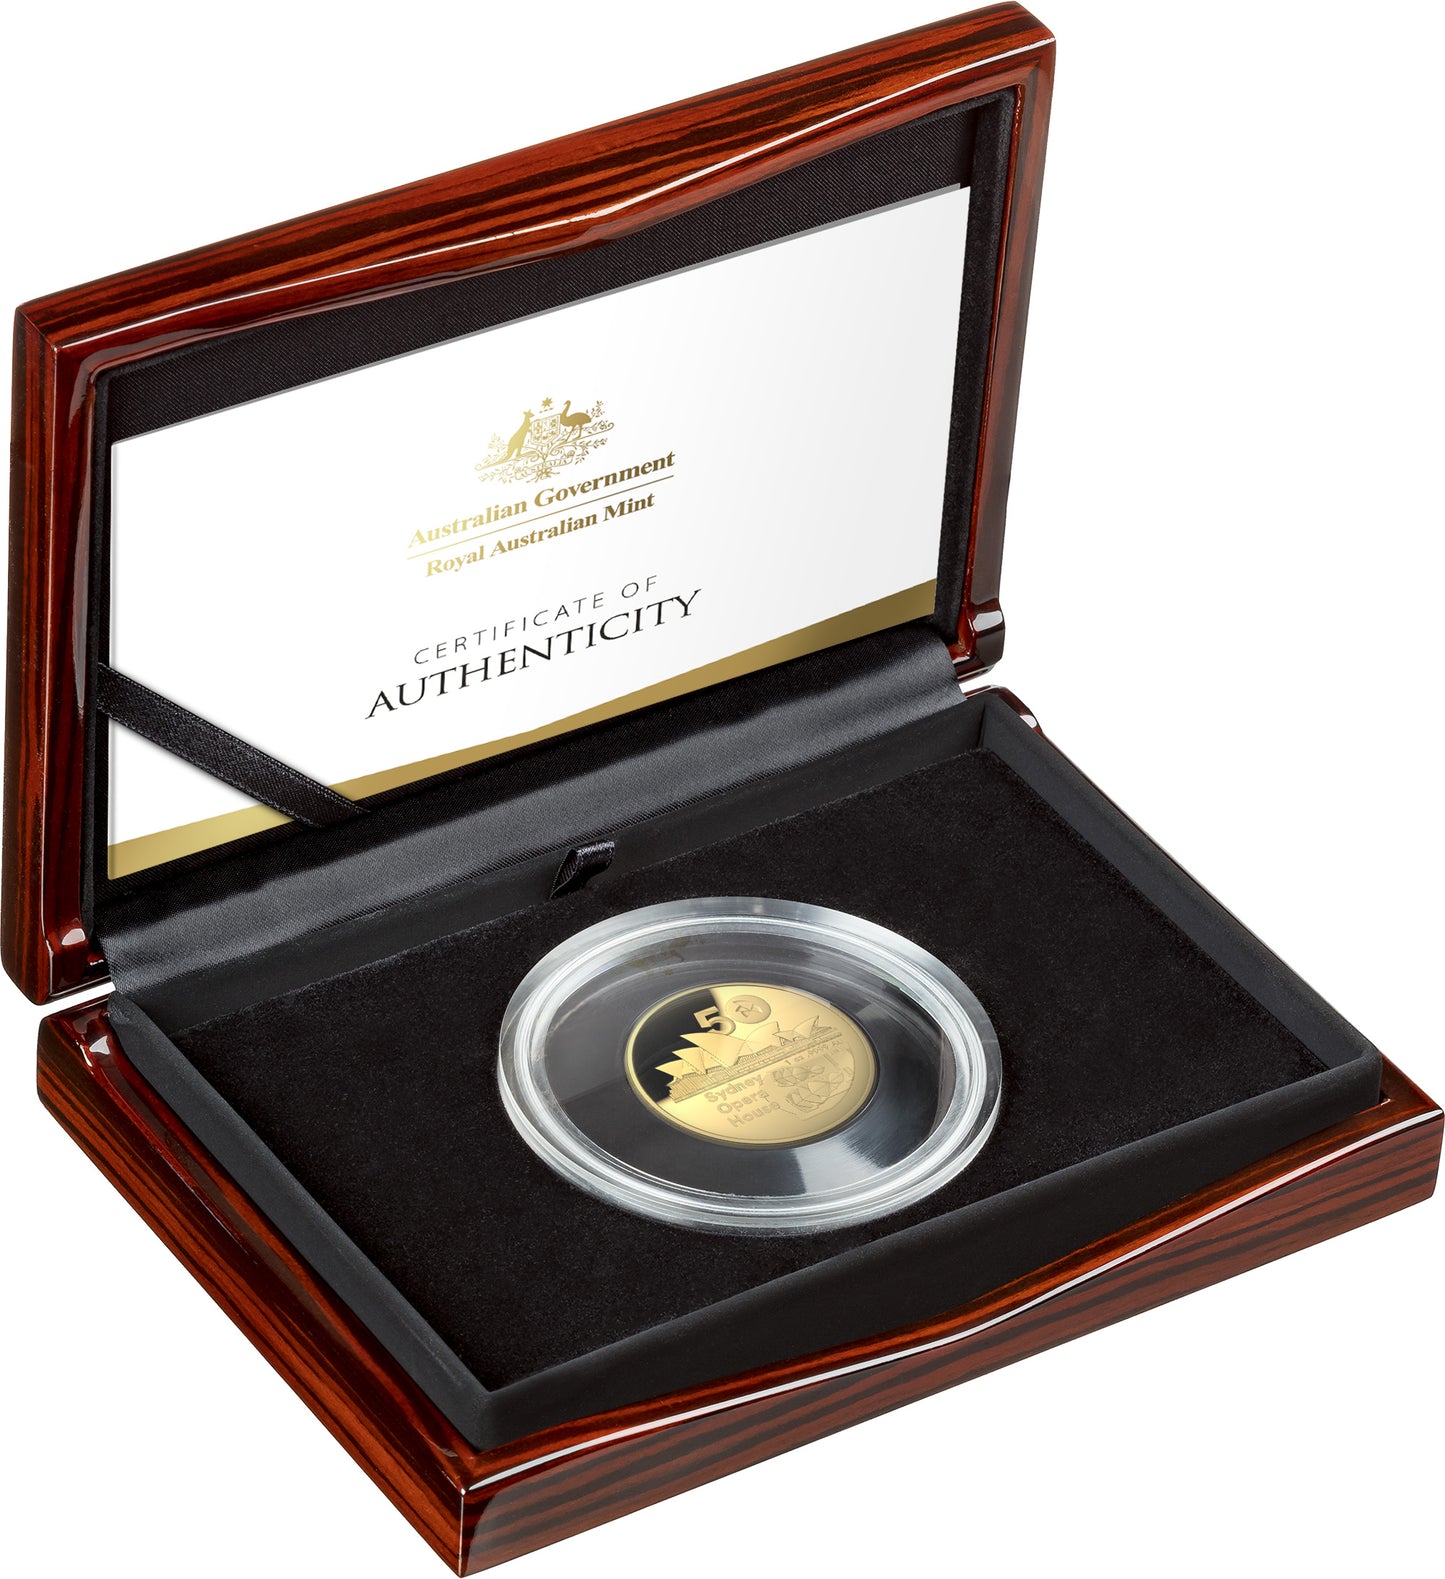 50th Anniversary of the Sydney Opera House 2023 $100 Gold Domed Proof Coin